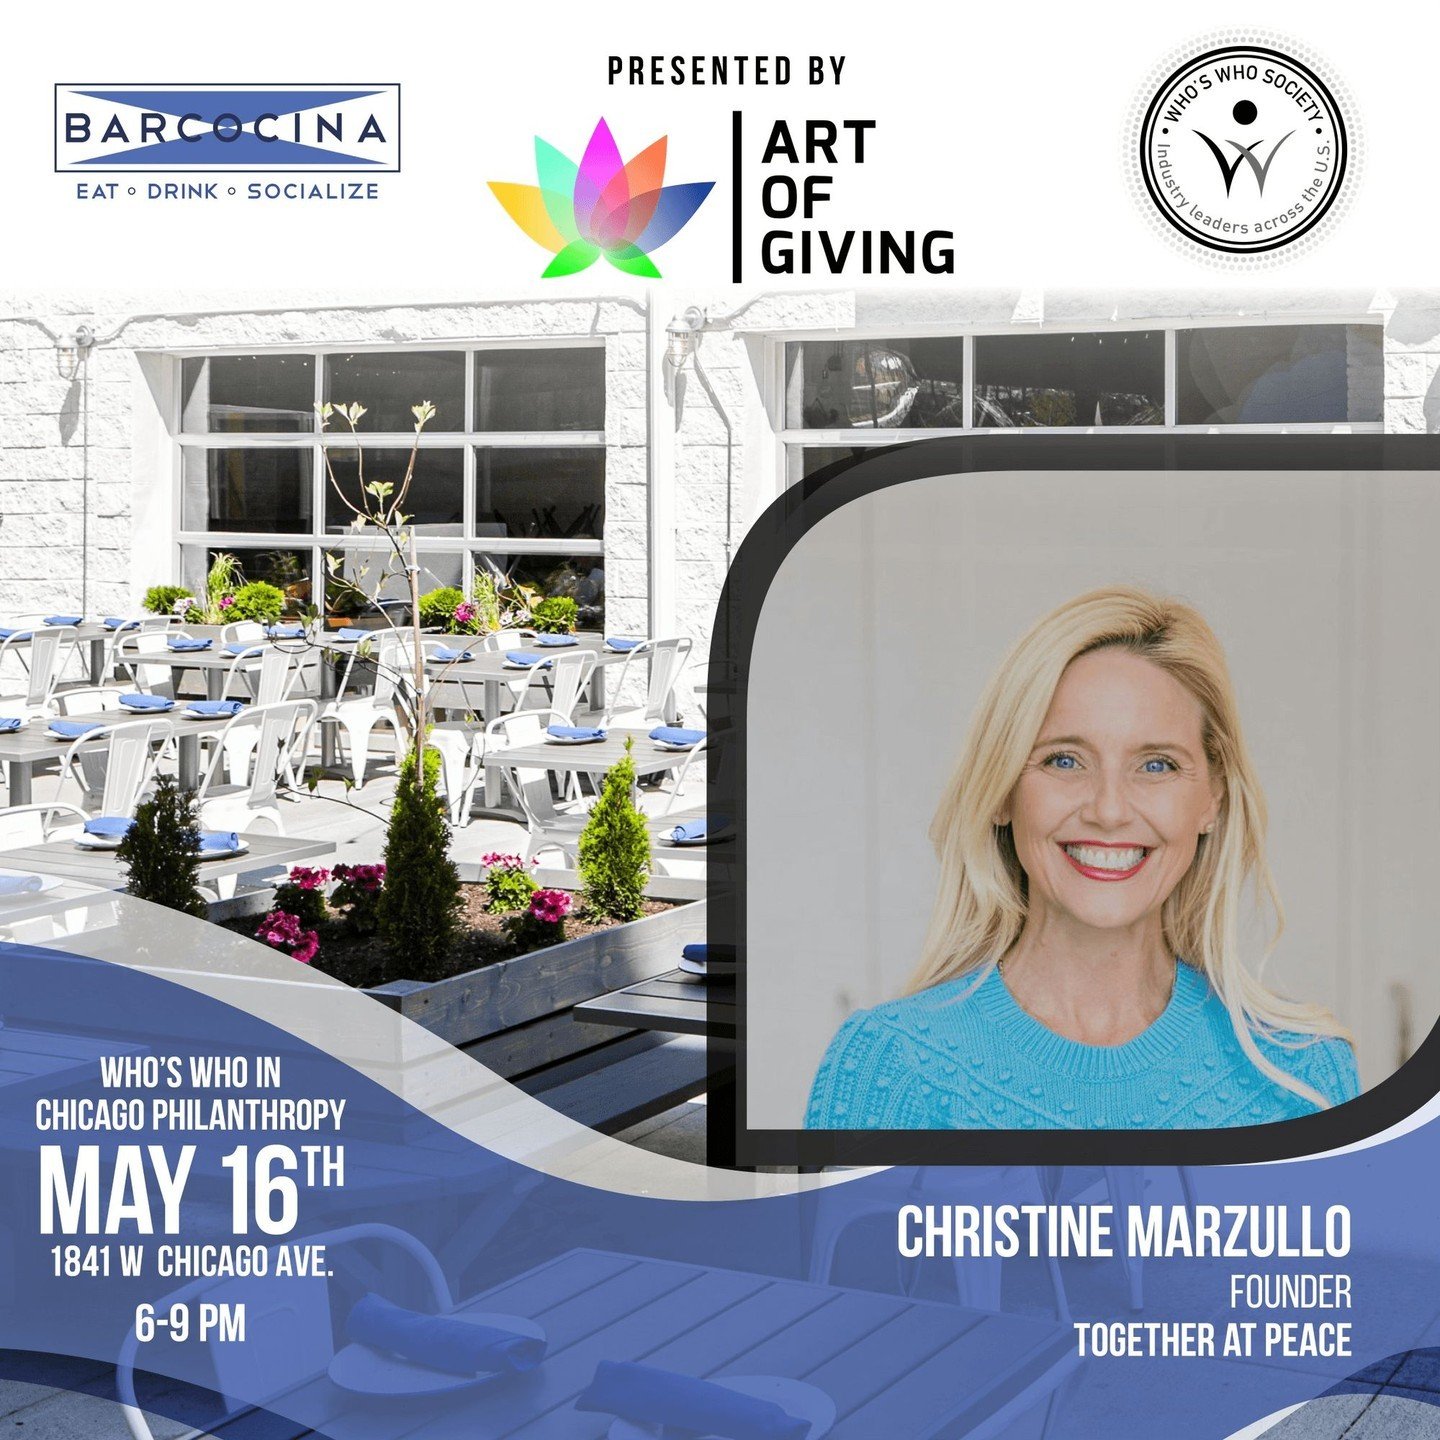 🎉🌟 Celebrate Philanthropy with Us! 🌟🎉

We're thrilled to announce a truly special occasion: Christine Marzullo, Founder of Together at Peace Foundation, has been nominated for the prestigious &quot;Who's Who in Chicago Philanthropy.&quot; The Art